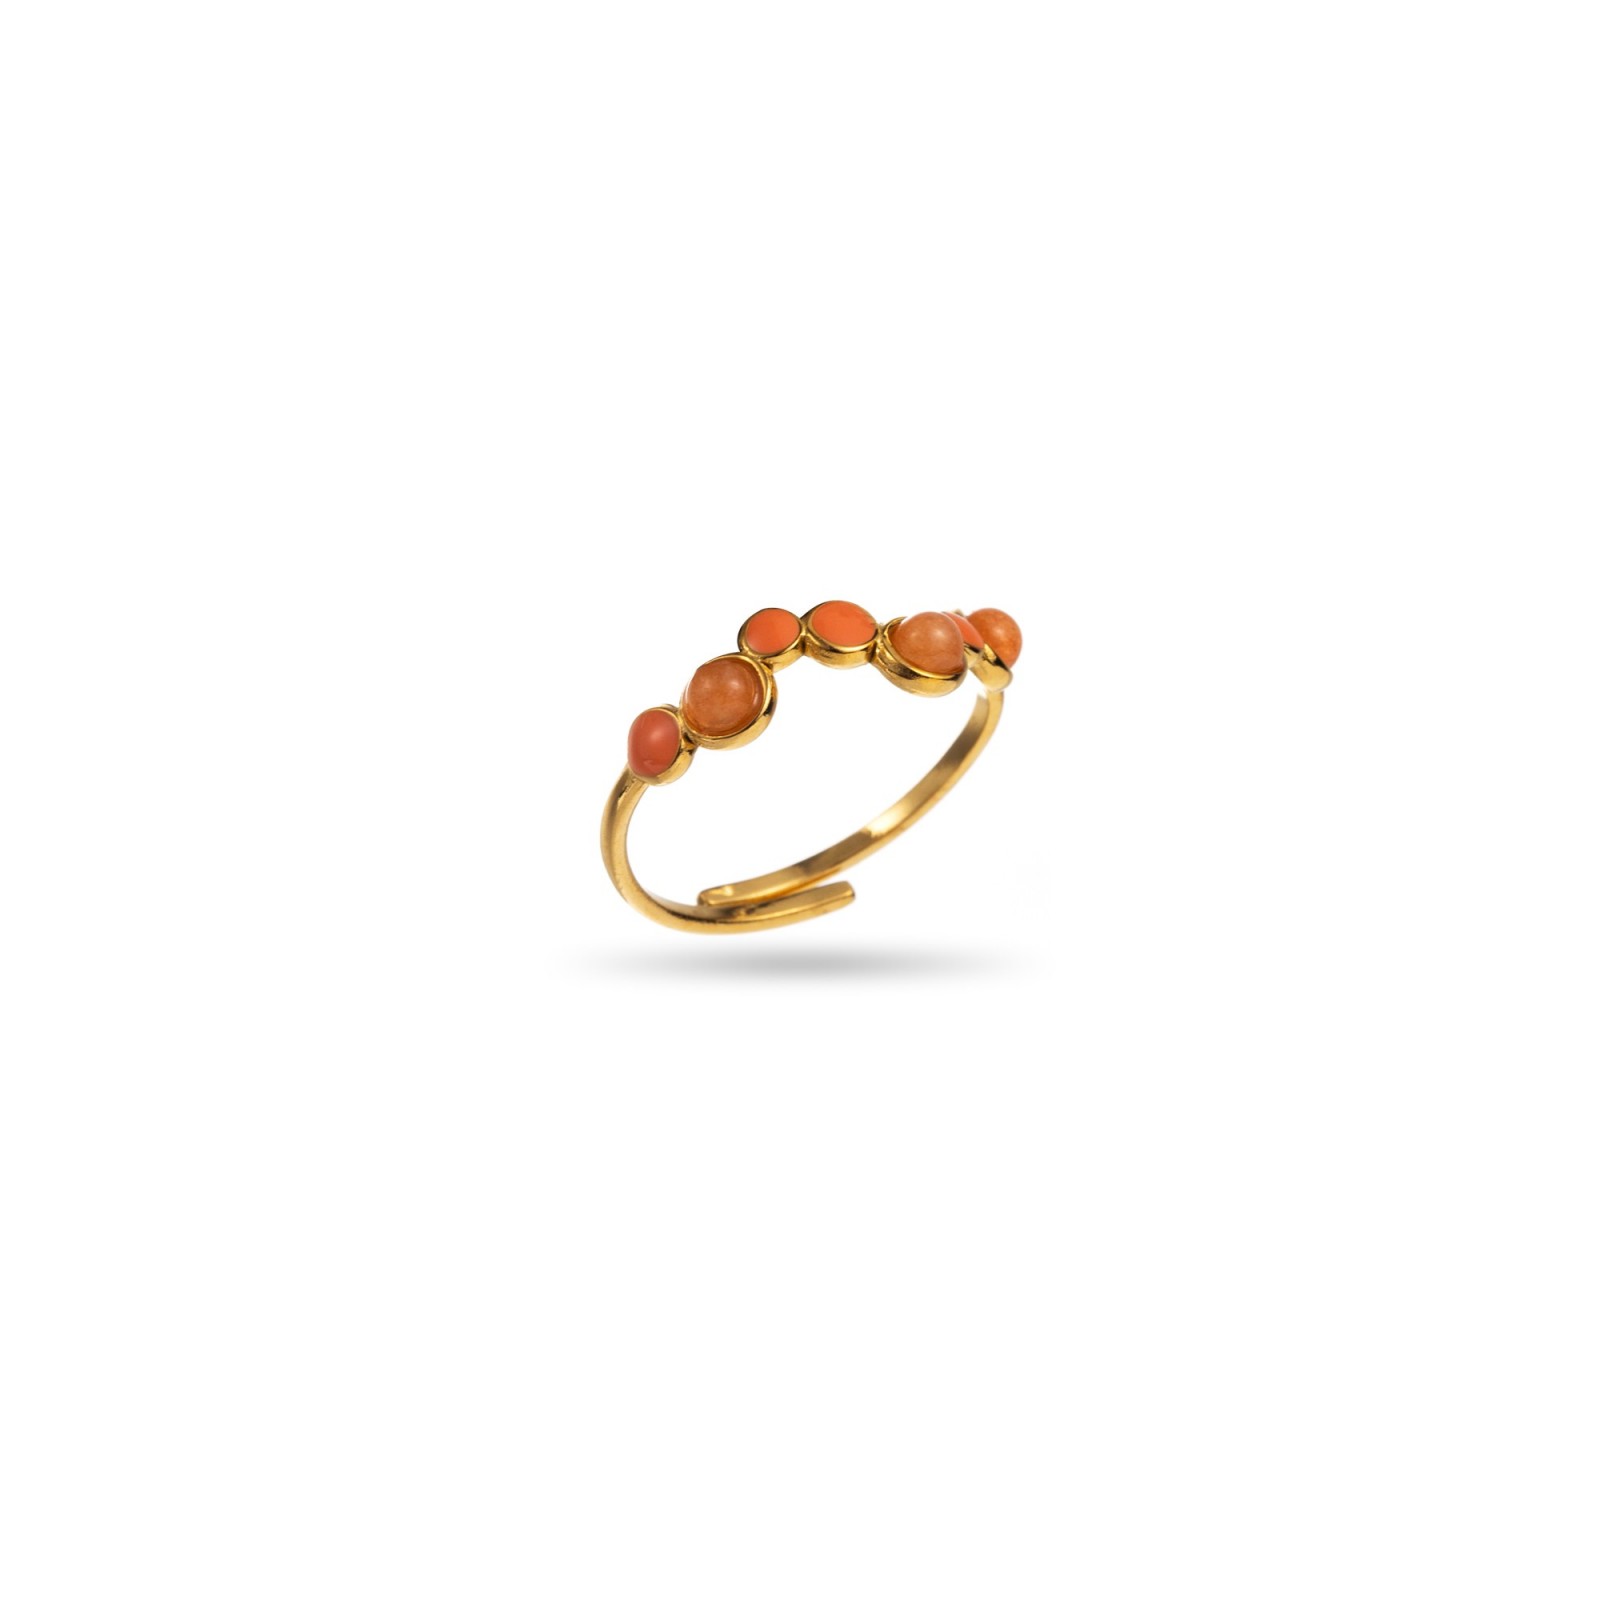 Colored Rounds and Stones Chain Ring Stone:Orange Agate